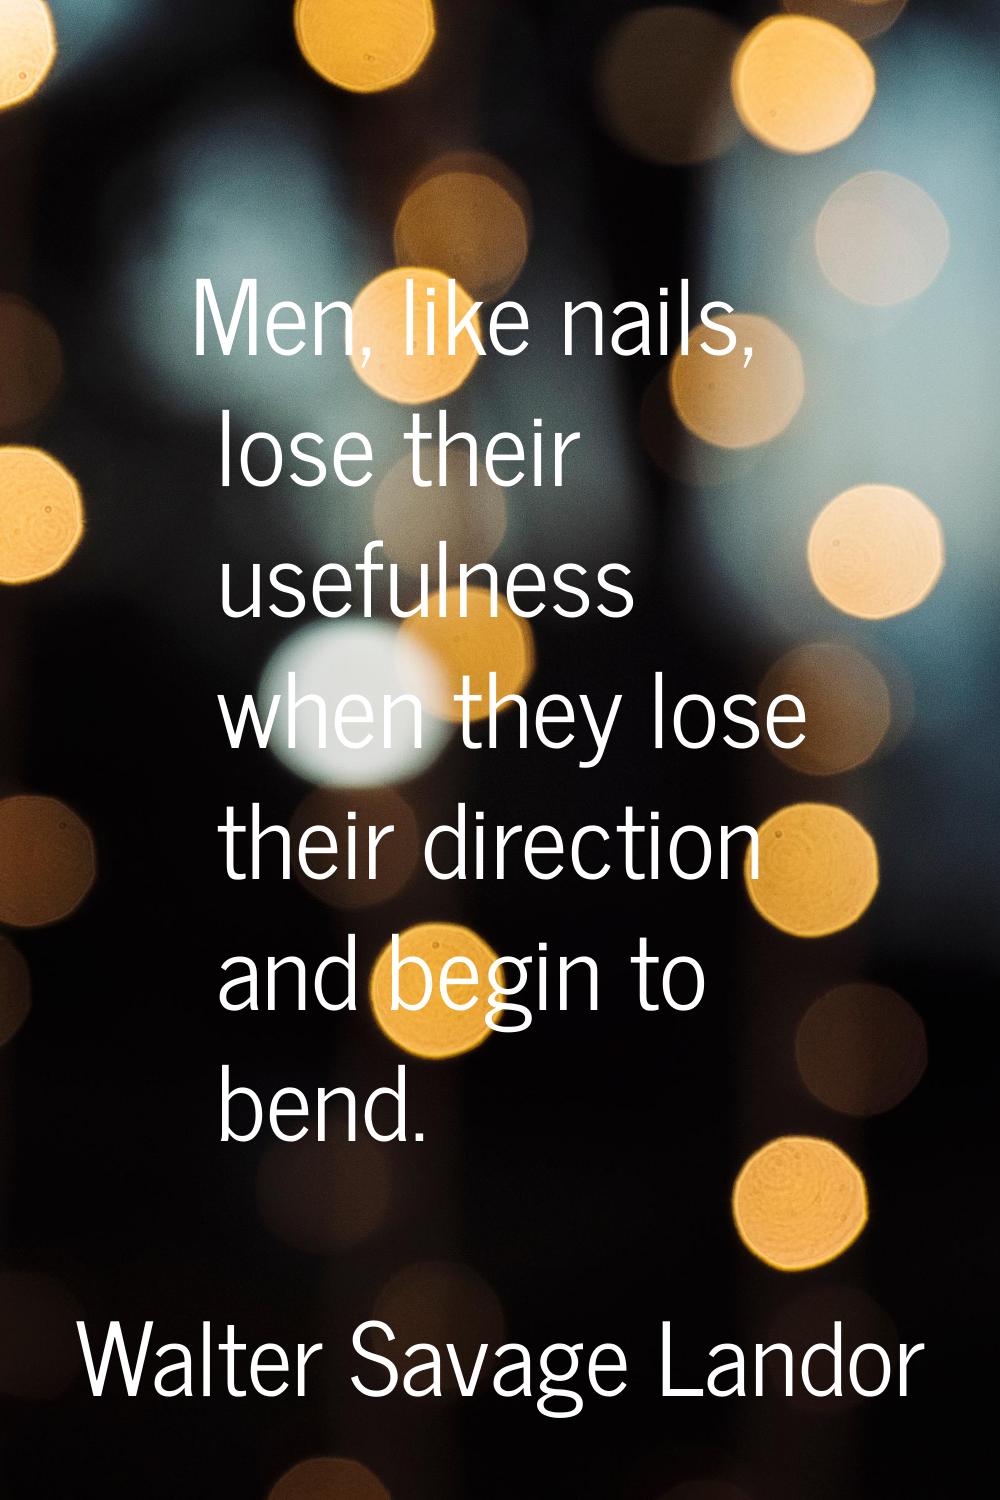 Men, like nails, lose their usefulness when they lose their direction and begin to bend.